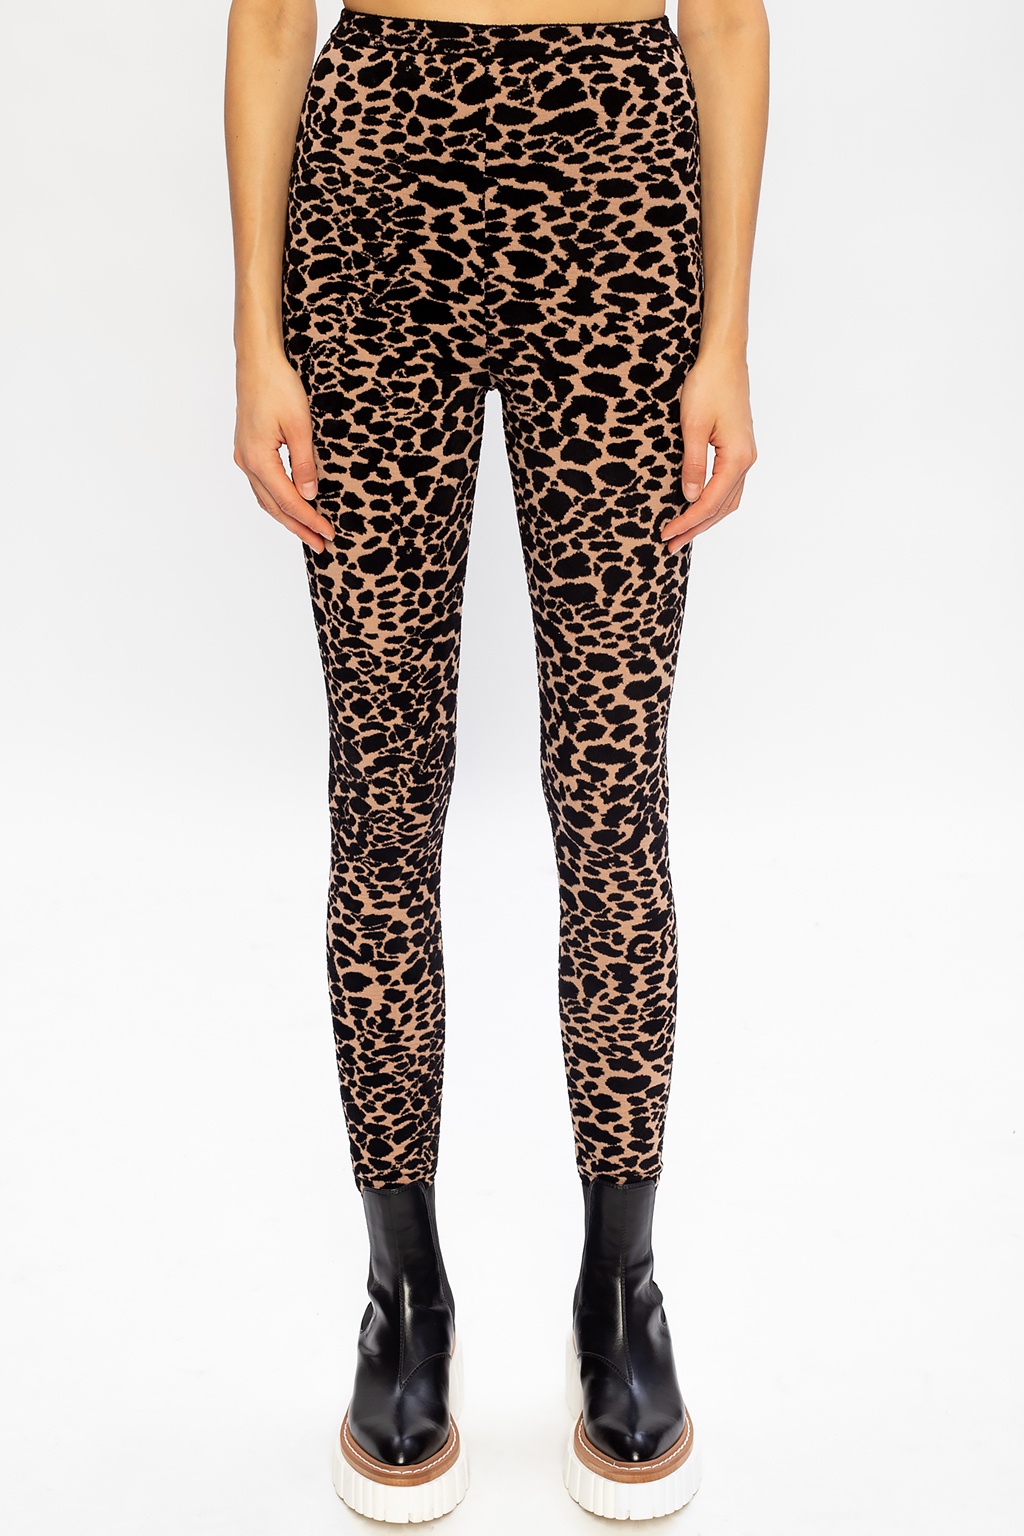 Alaia Patterned Club trousers